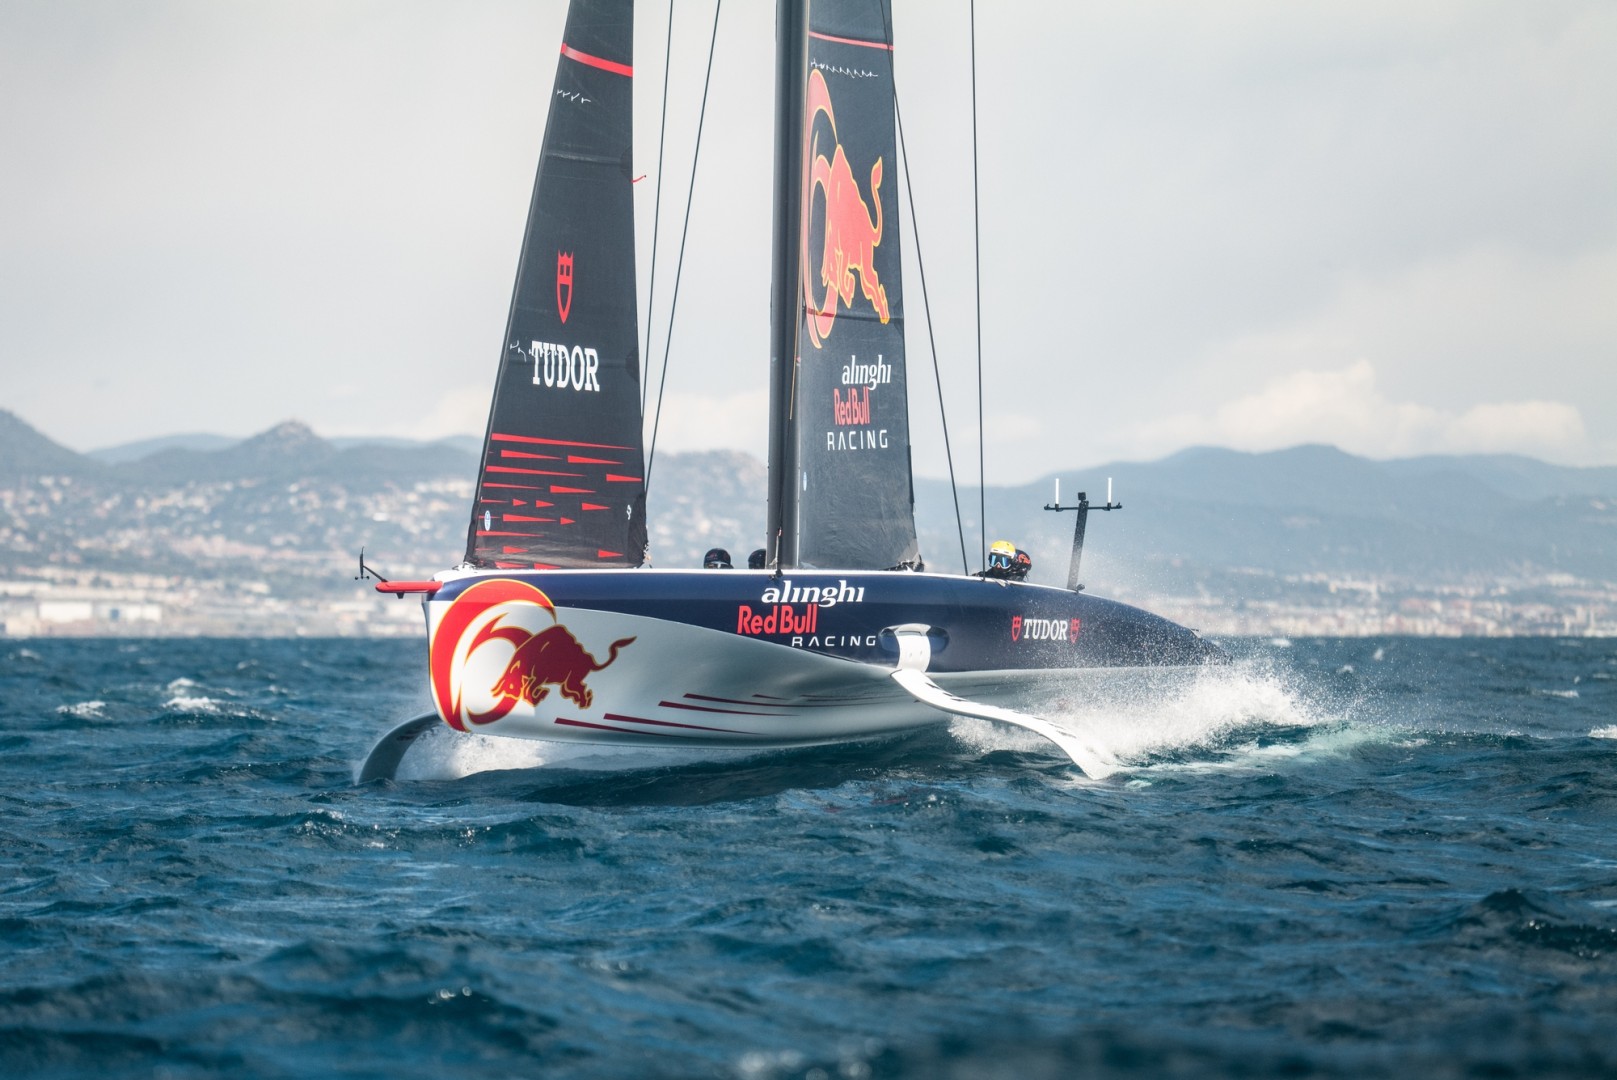 Alinghi Redbull, ahead of all expectations in sailing performance